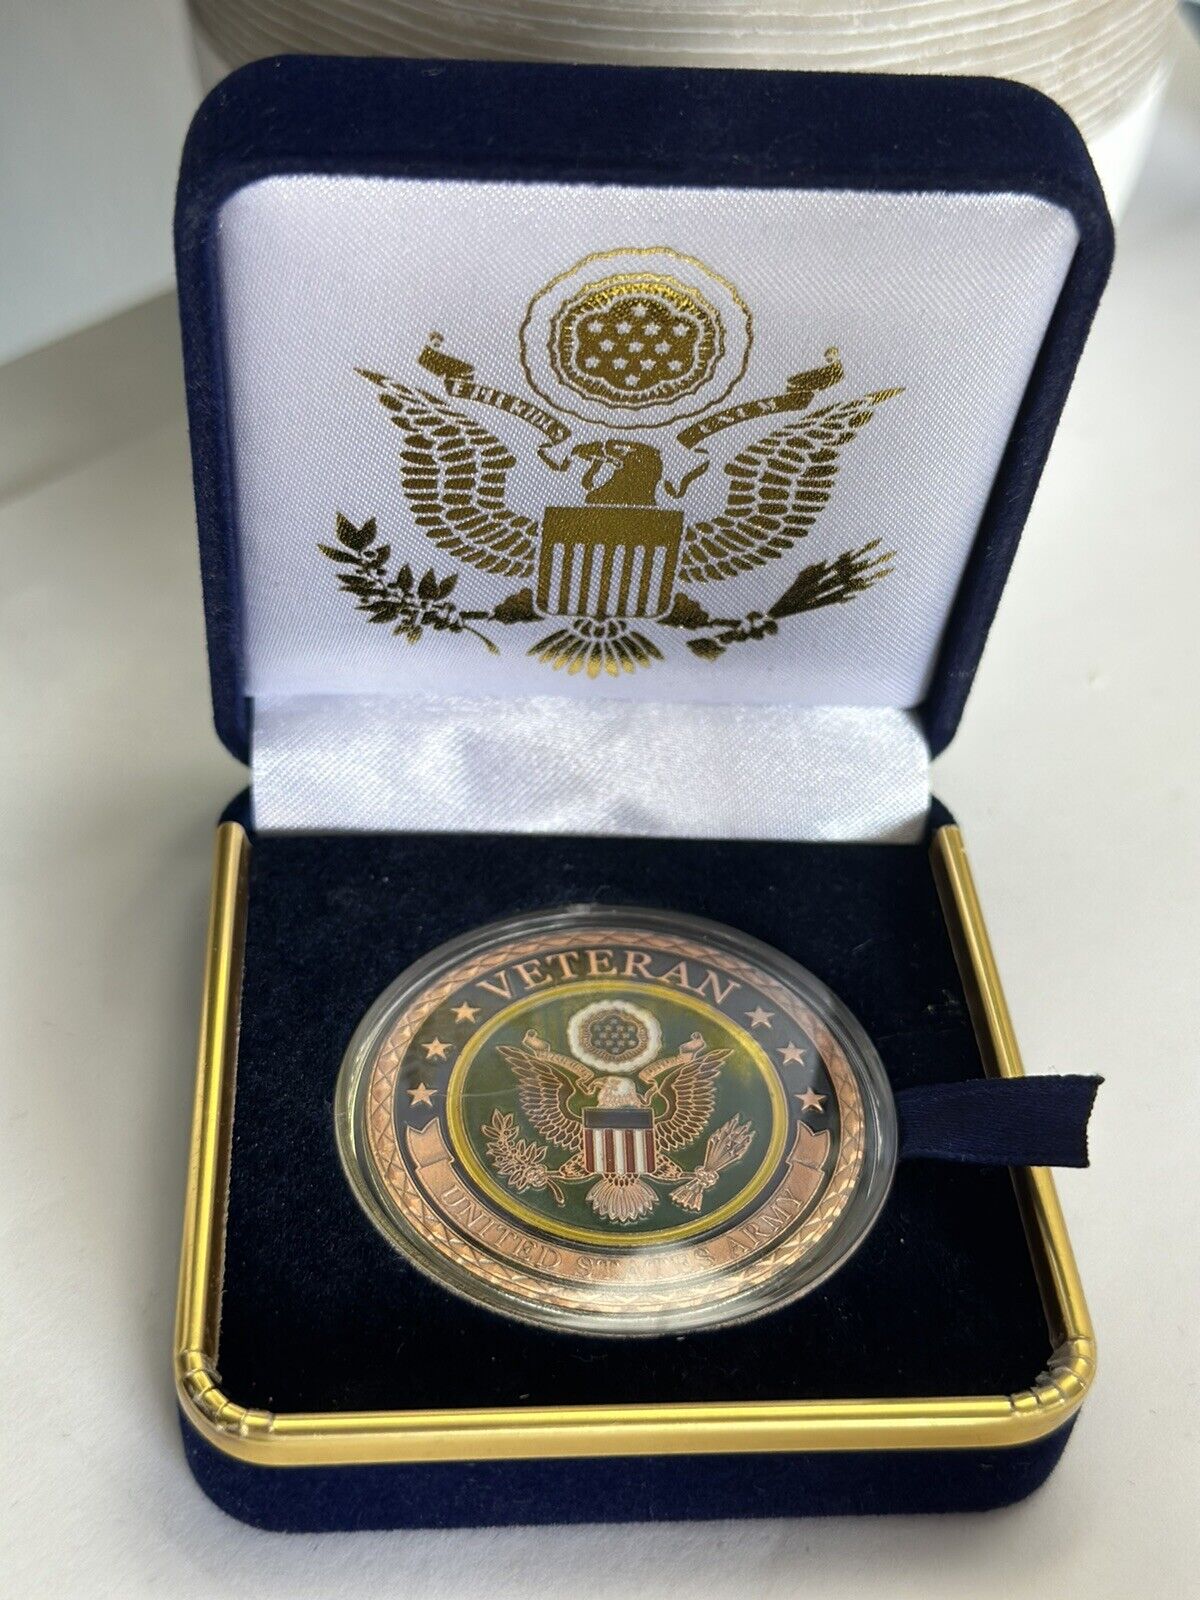 PROUD TO BE ARMY VETERAN  Challenge Coin with Presentationt Box